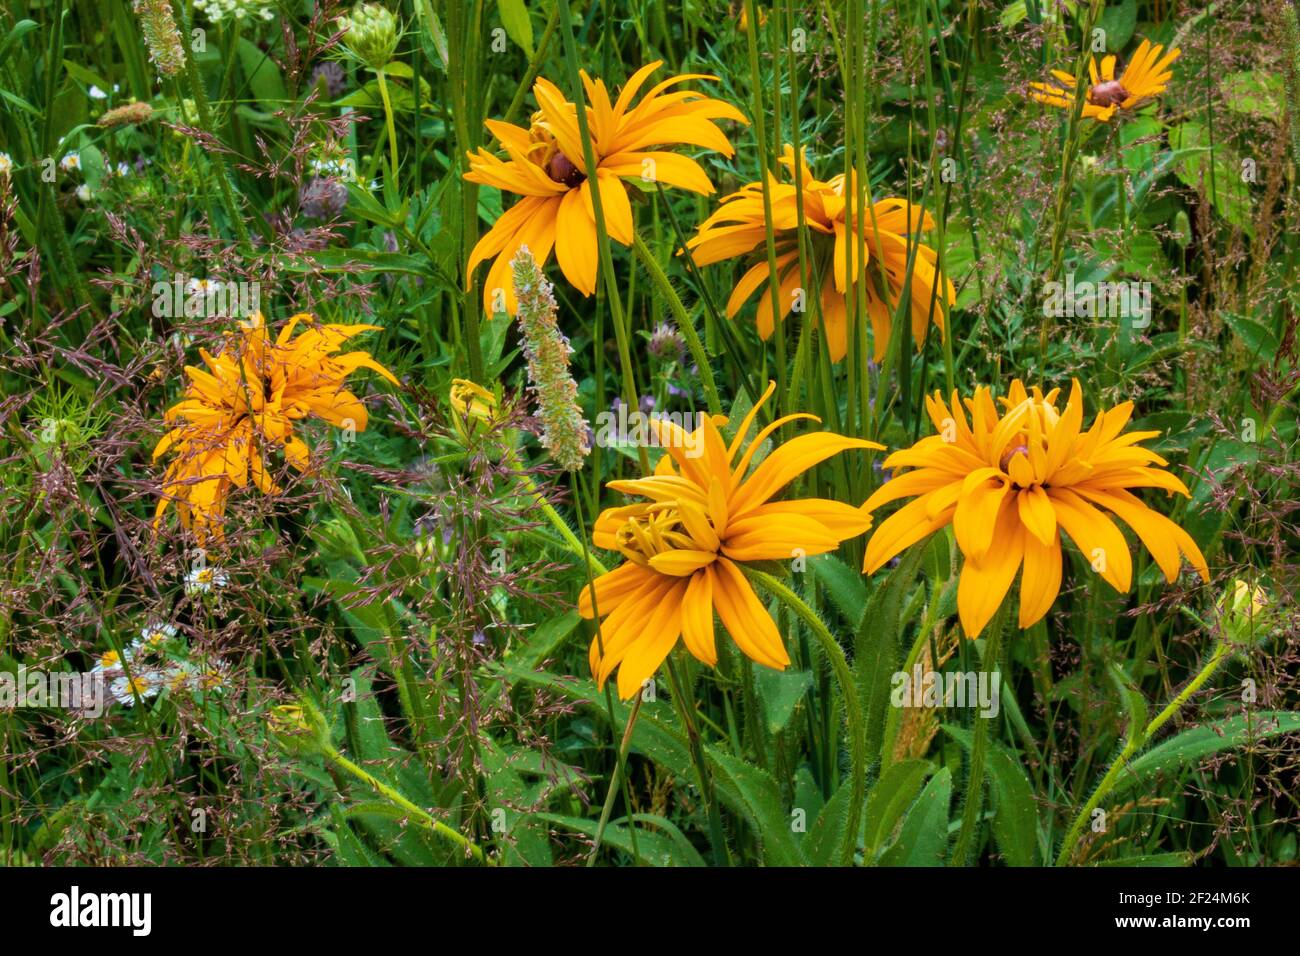 An unusual Black-eyed Susan with naturally growing double ray florets found growing in a wild meadow in Pennsylvania's Pocono Mountains. Stock Photo